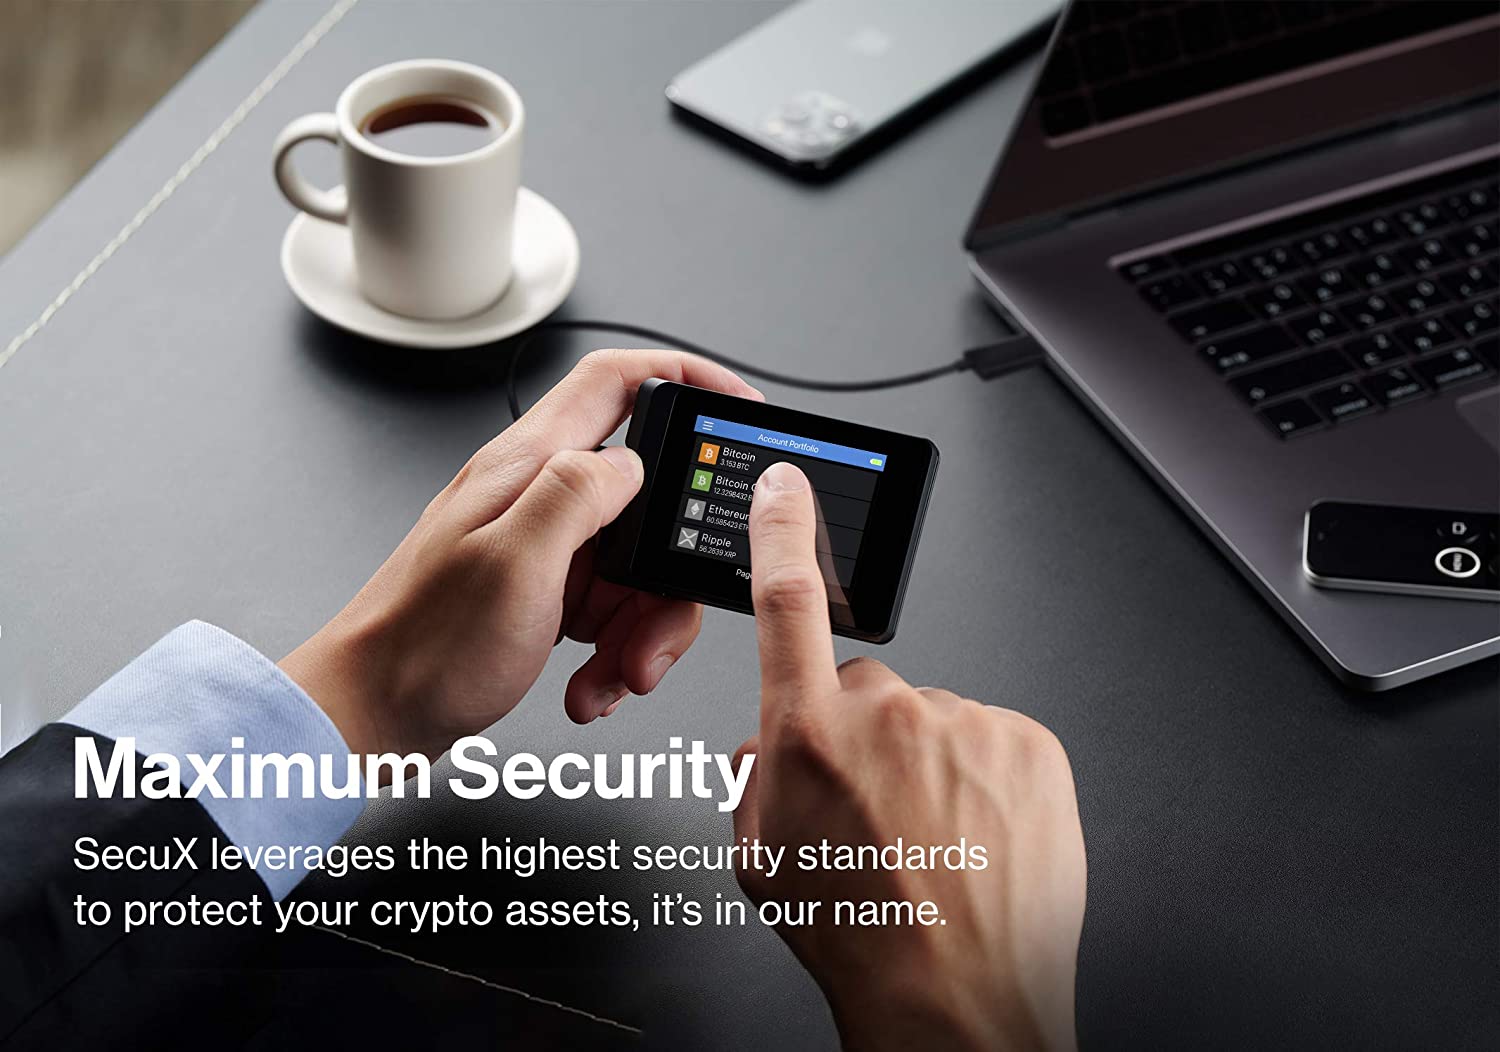 msecure crypto wallet